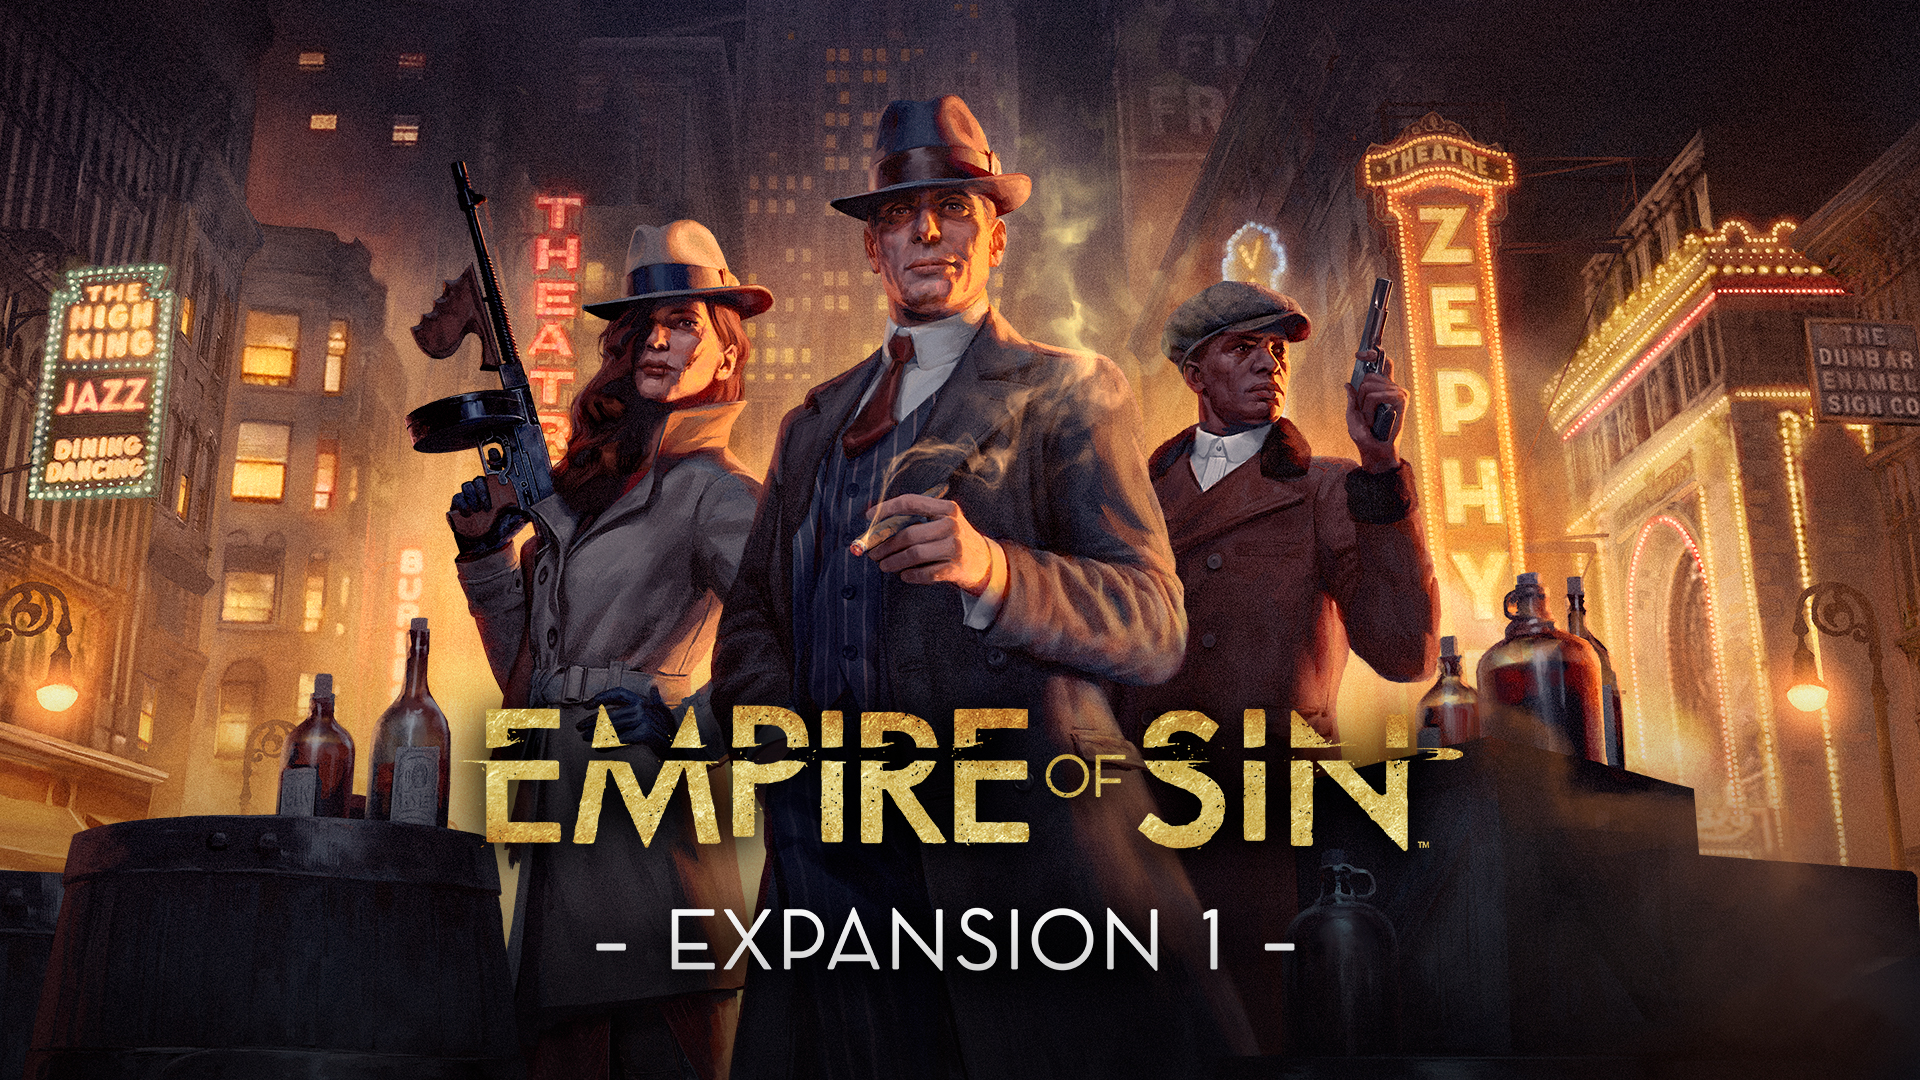 Empire of Sin - Expansion 1